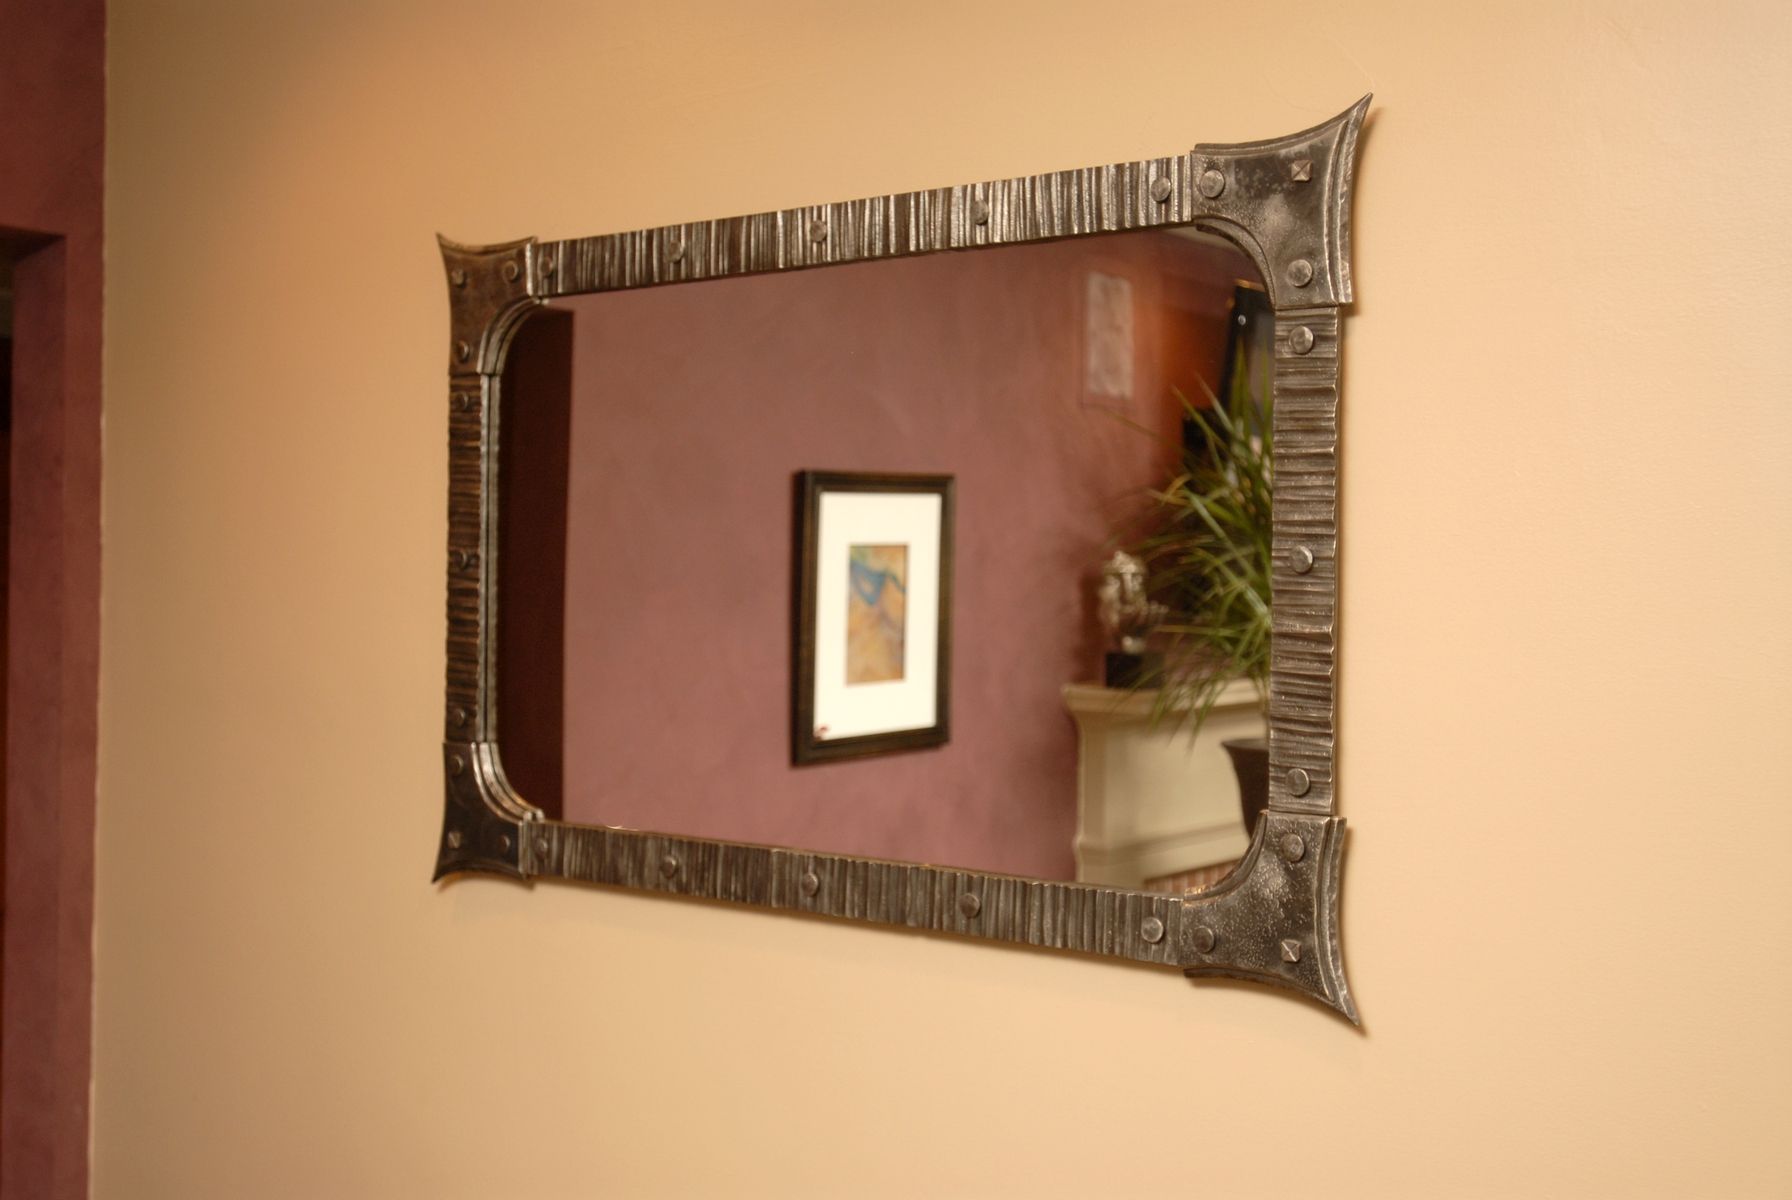 Handmade Custom Forged Iron Wall Mirrorarc Iron Creations Throughout Iron Frame Handcrafted Wall Mirrors (View 5 of 15)